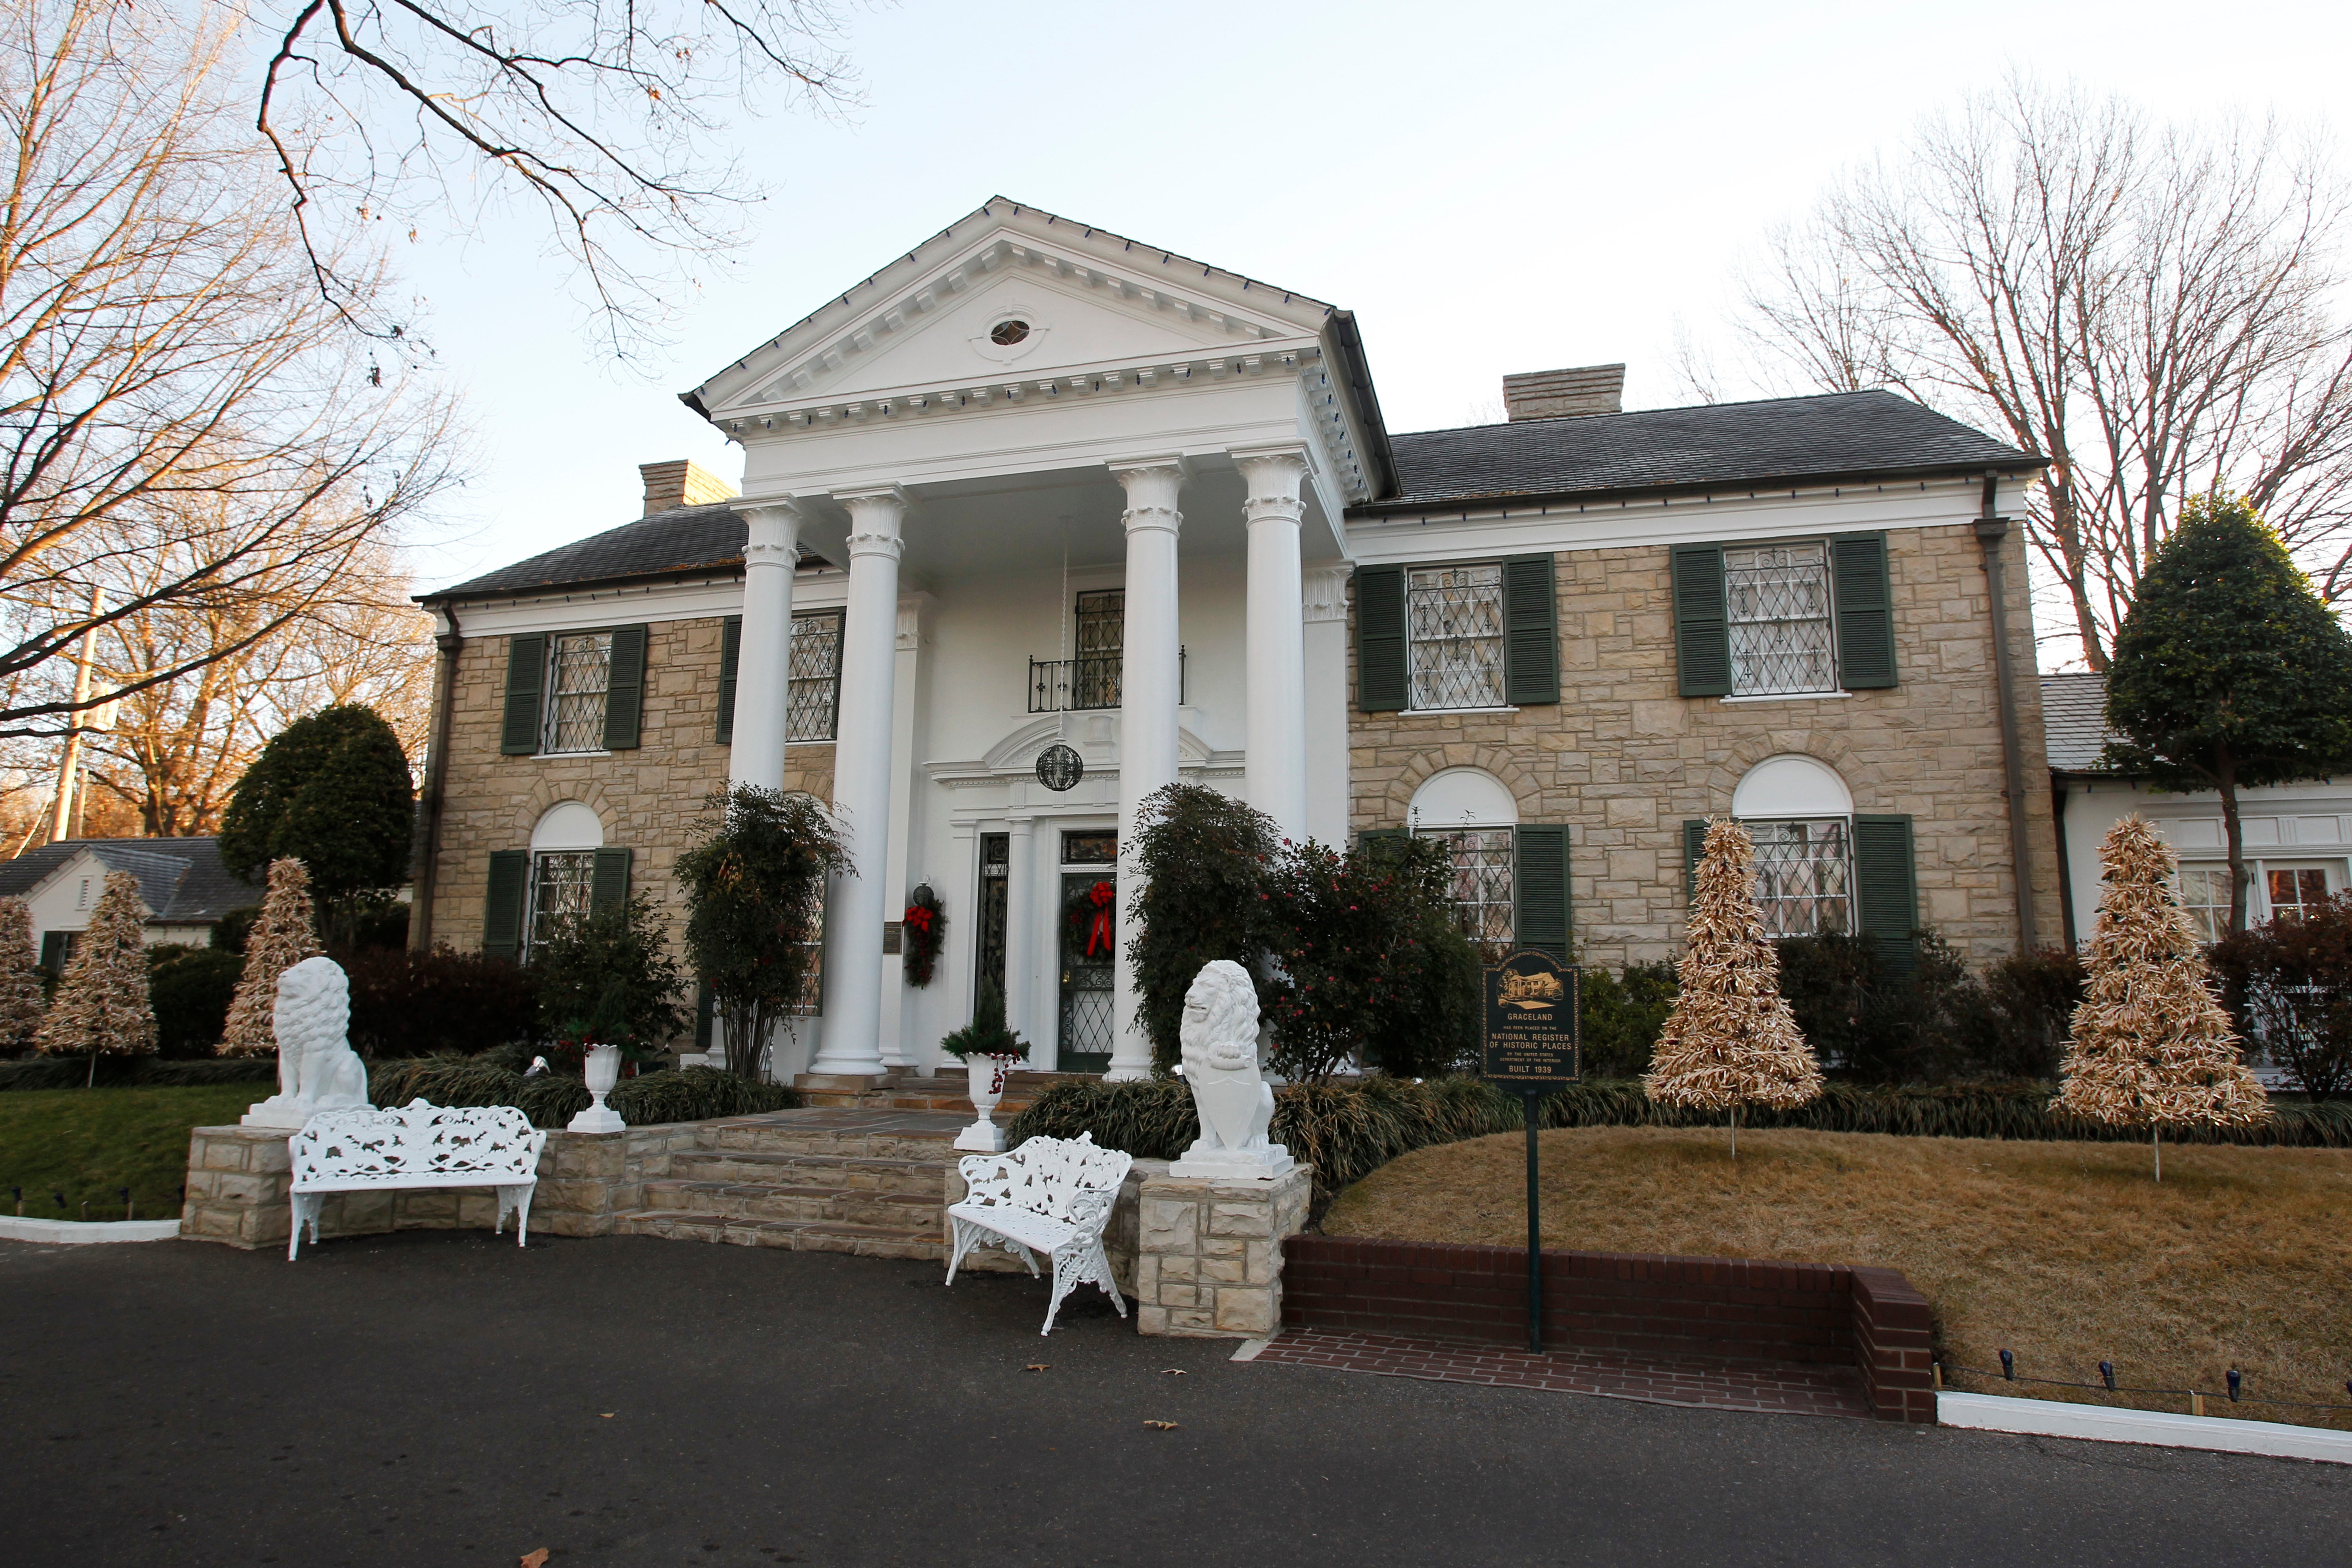 Elvis Presley’s Graceland mansion, pictured, was almost sold in a foreclosure auction that his granddaughter said was fraudulent. A judge has since blocked the sale and Tennessee police have turned the investigation over to federal authorities